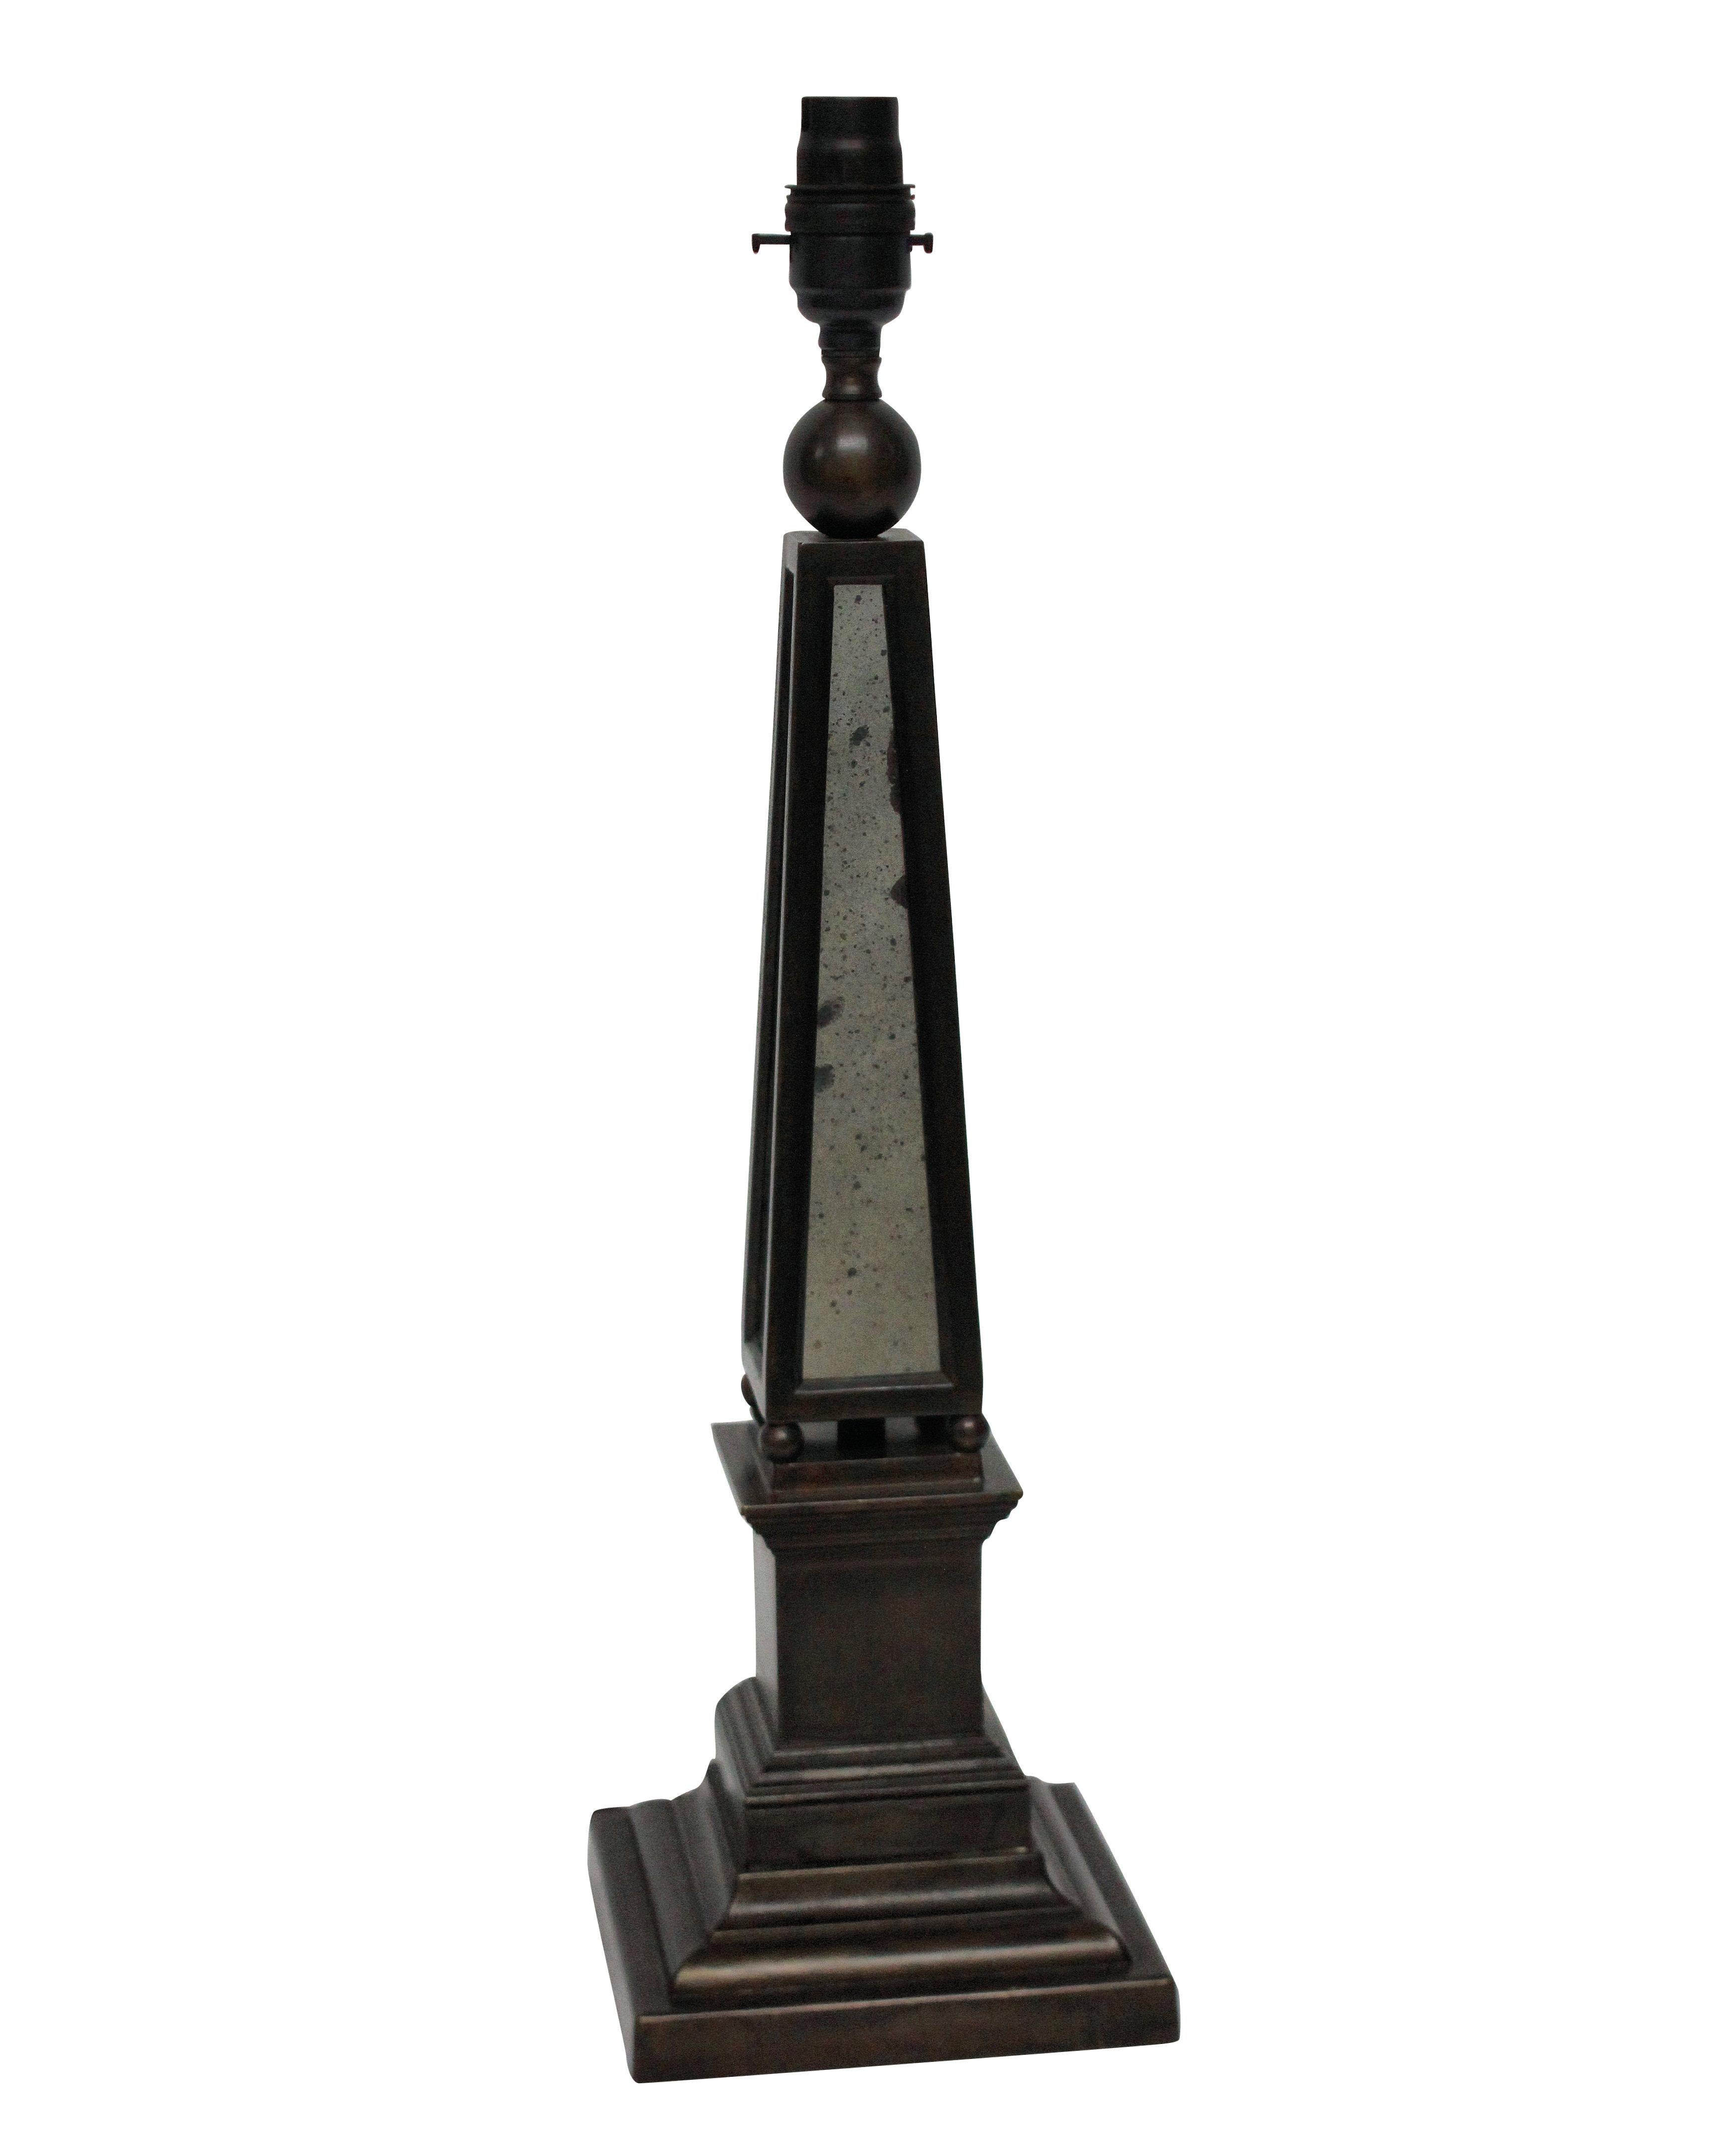 A pair of English bronzed obelisk lamps with distressed mirror panels.